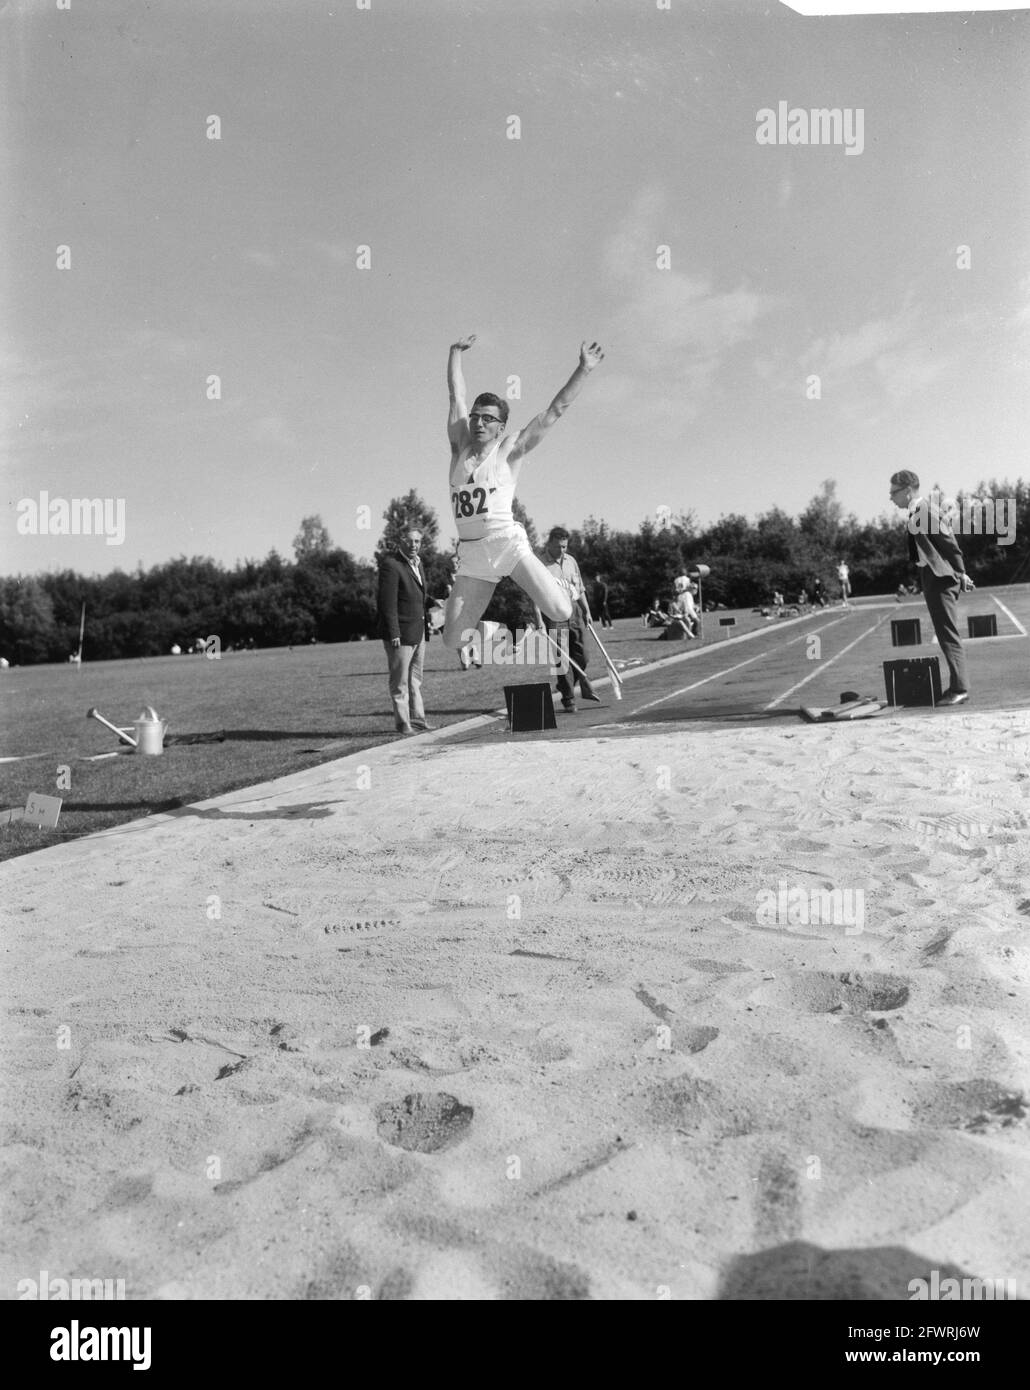 Dutch athletics championships in Groningen, J. Kant in action long jump, August 14, 1965, athletics, championships, The Netherlands, 20th century press agency photo, news to remember, documentary, historic photography 1945-1990, visual stories, human history of the Twentieth Century, capturing moments in time Stock Photo